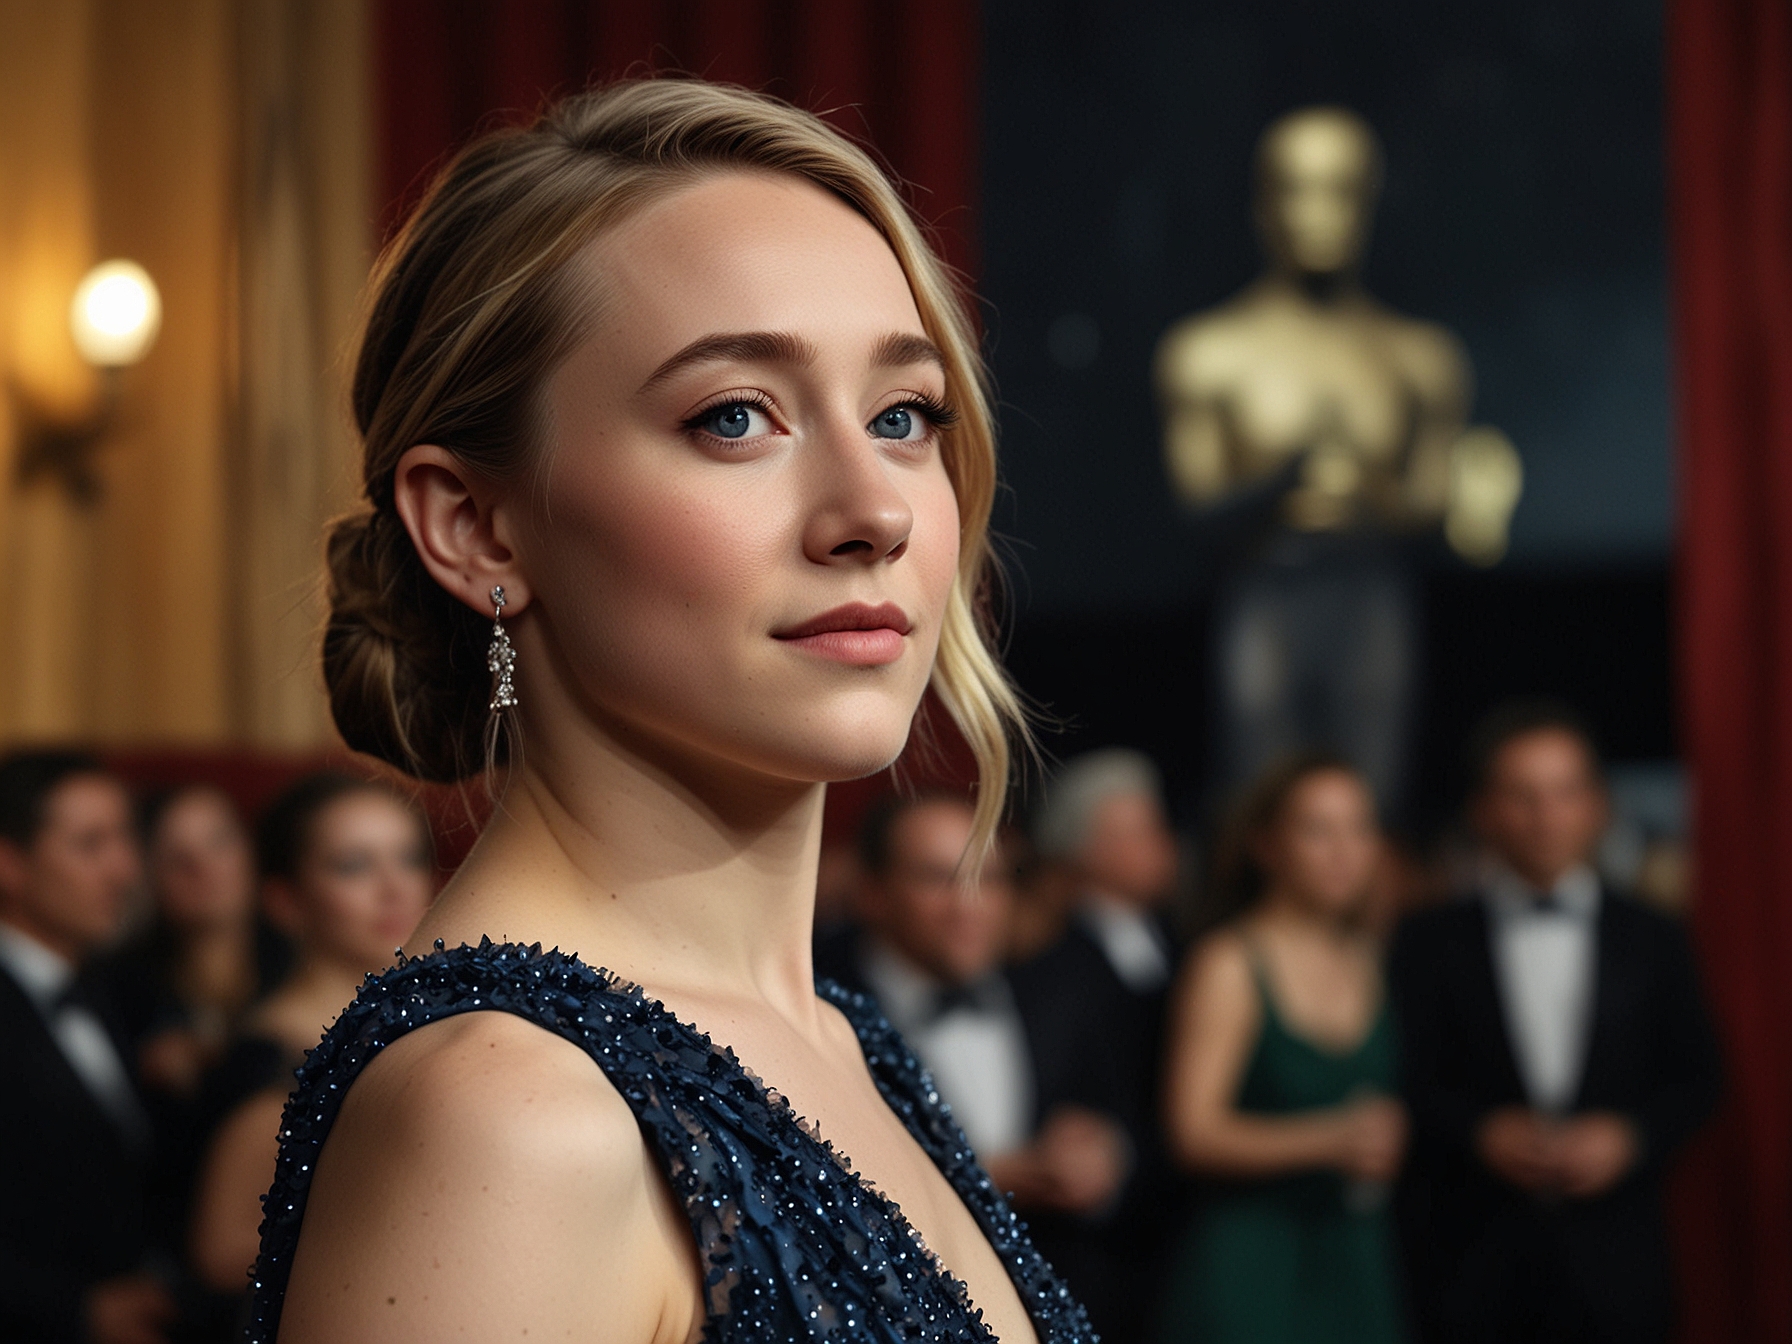 Saoirse Ronan at a movie premiere, capturing her poised and confident demeanor that matches her praised performance, marking her as a top contender for the Best Actress award at the 2025 Oscars.